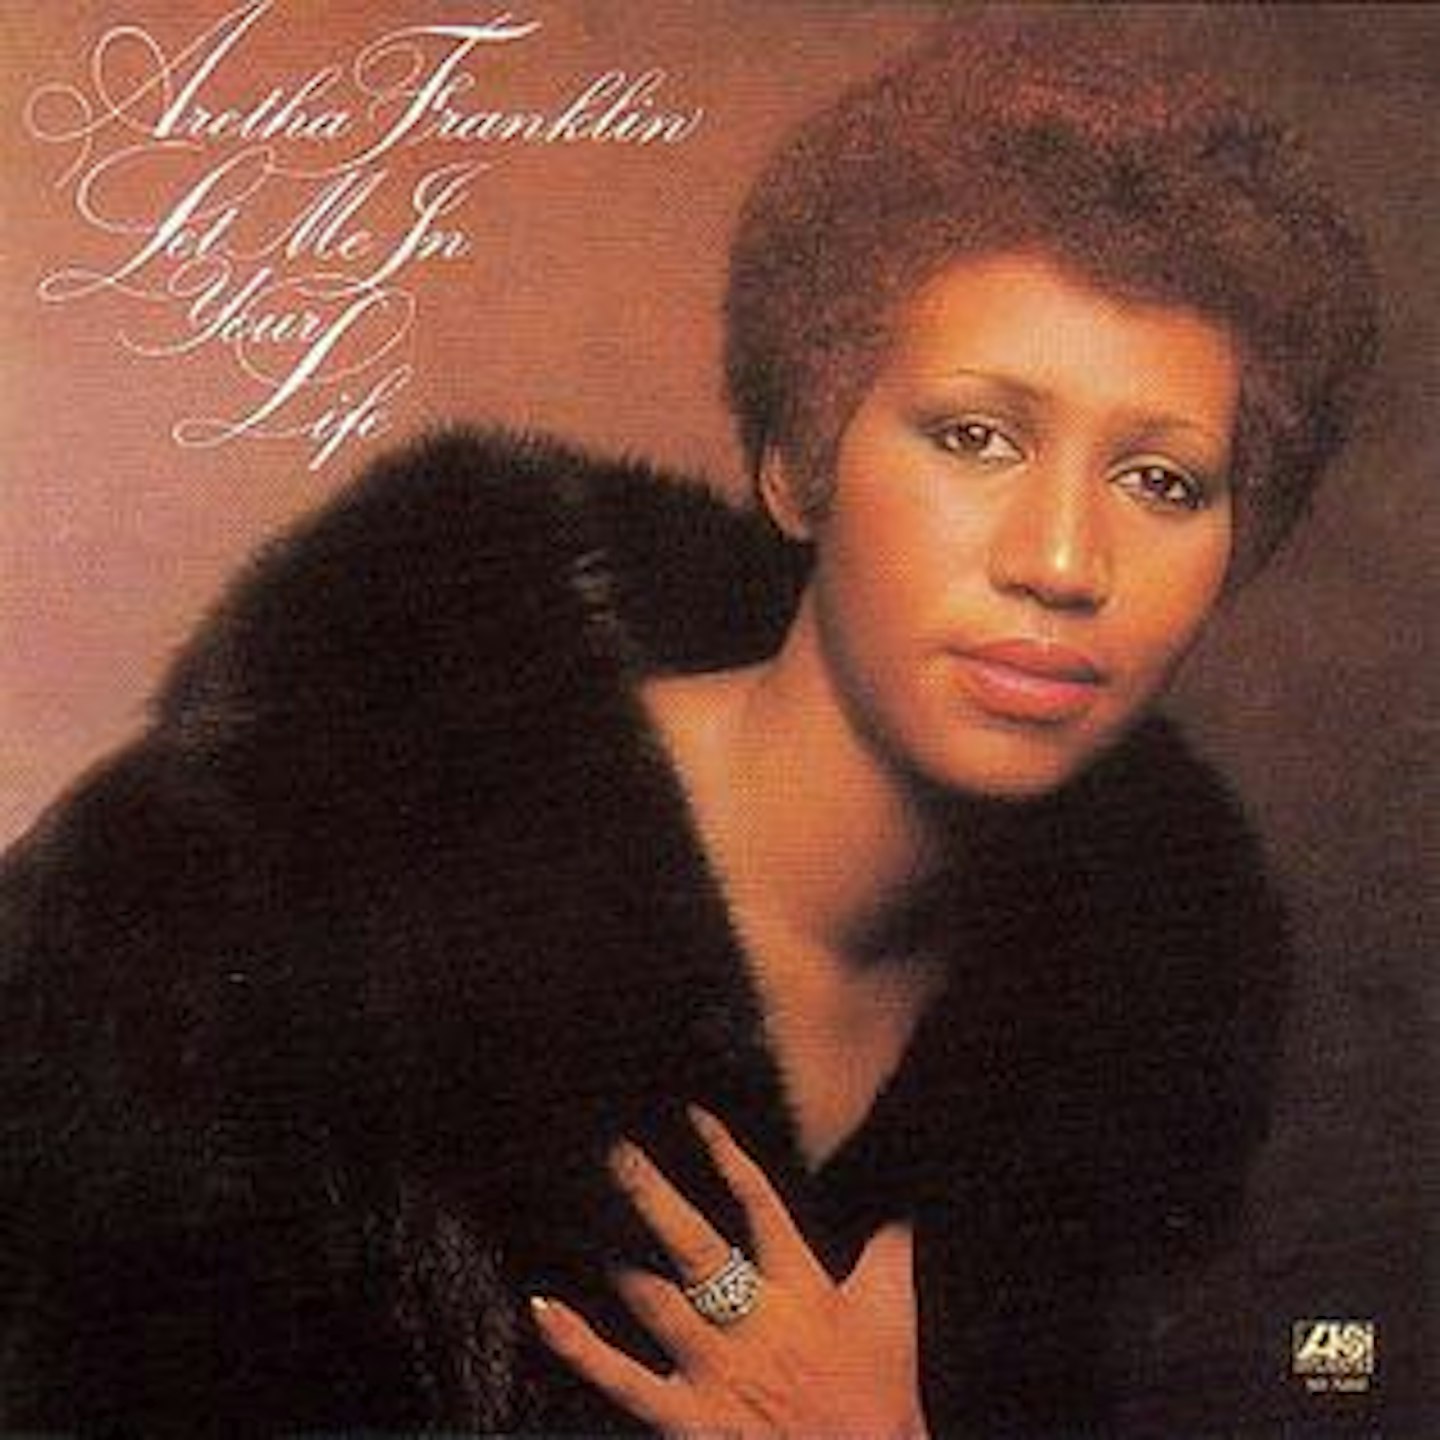 Let Me In Your Life - Aretha Franklin